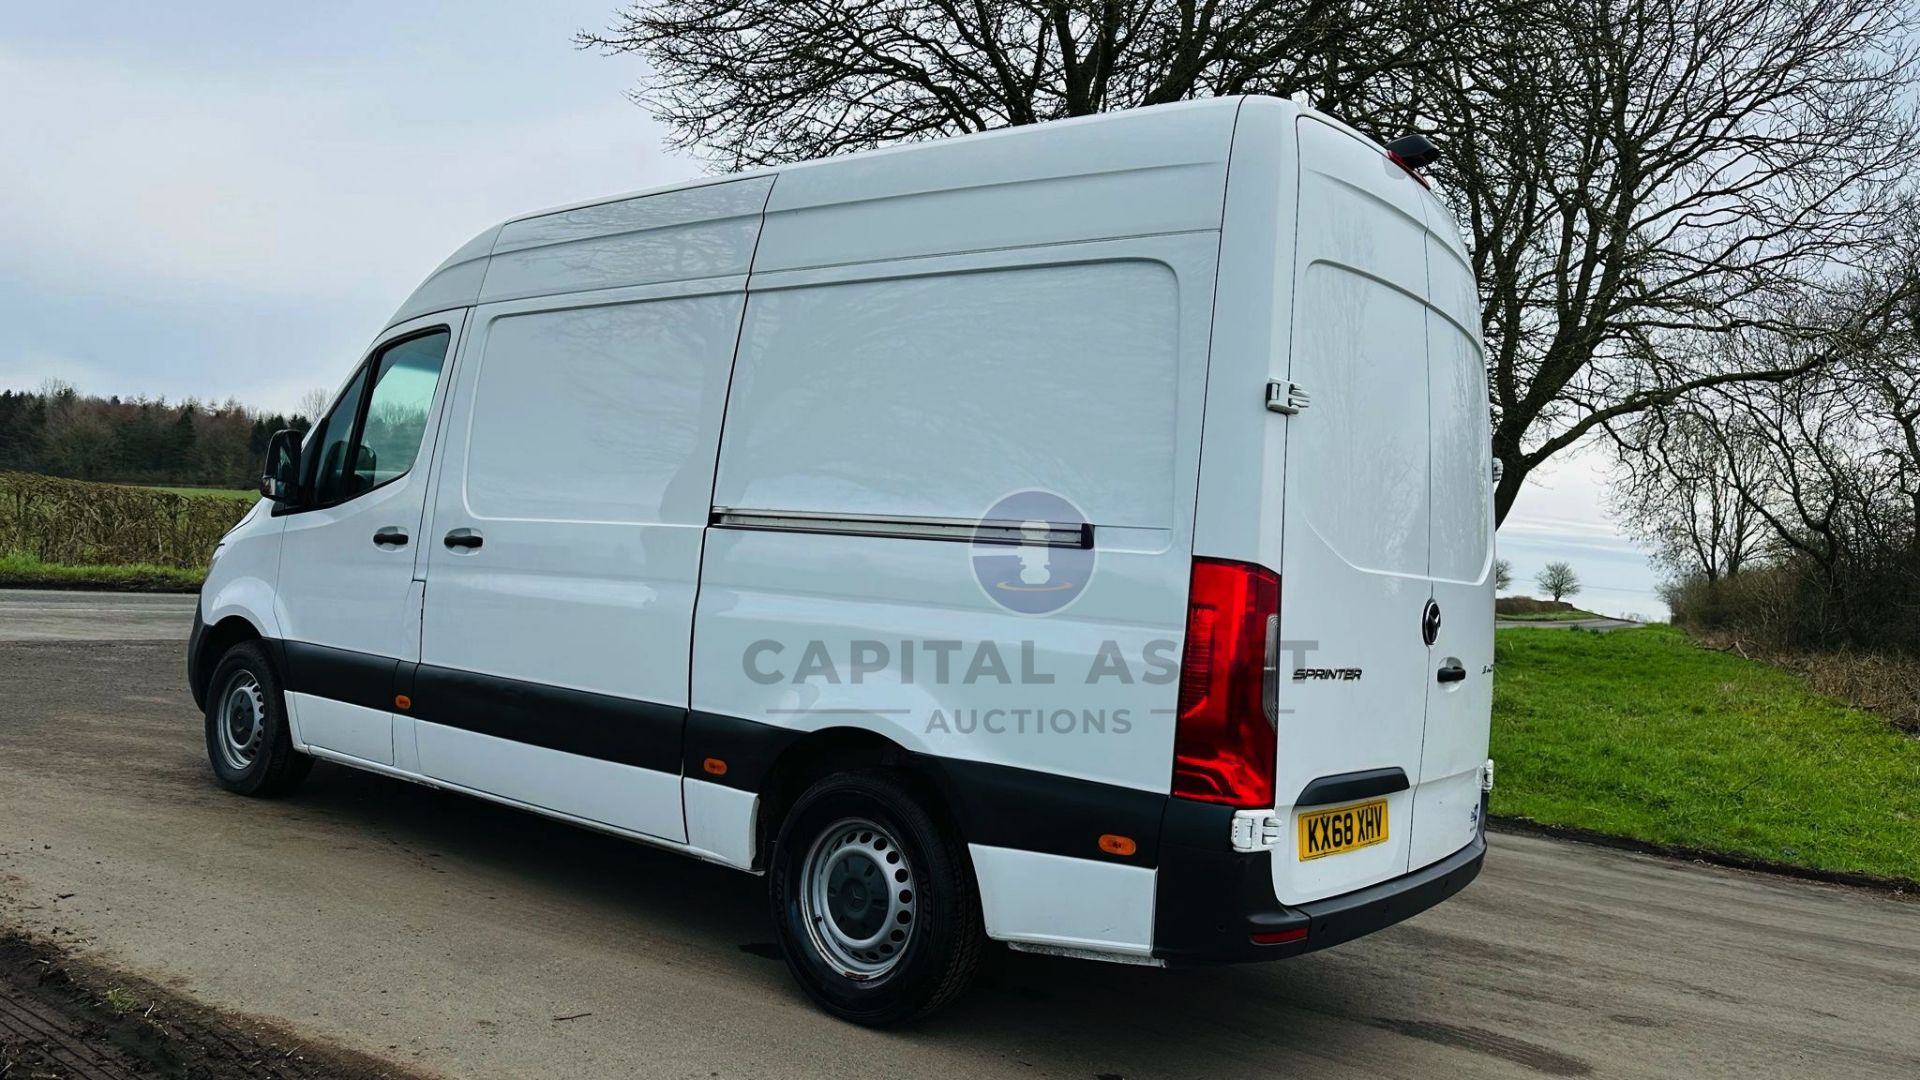 MERCEDES-BENZ SPRINTER 314 CDI *MWB - REFRIGERATED VAN* (2019 - FACELIFT MODEL) *OVERNIGHT STANDBY* - Image 12 of 41